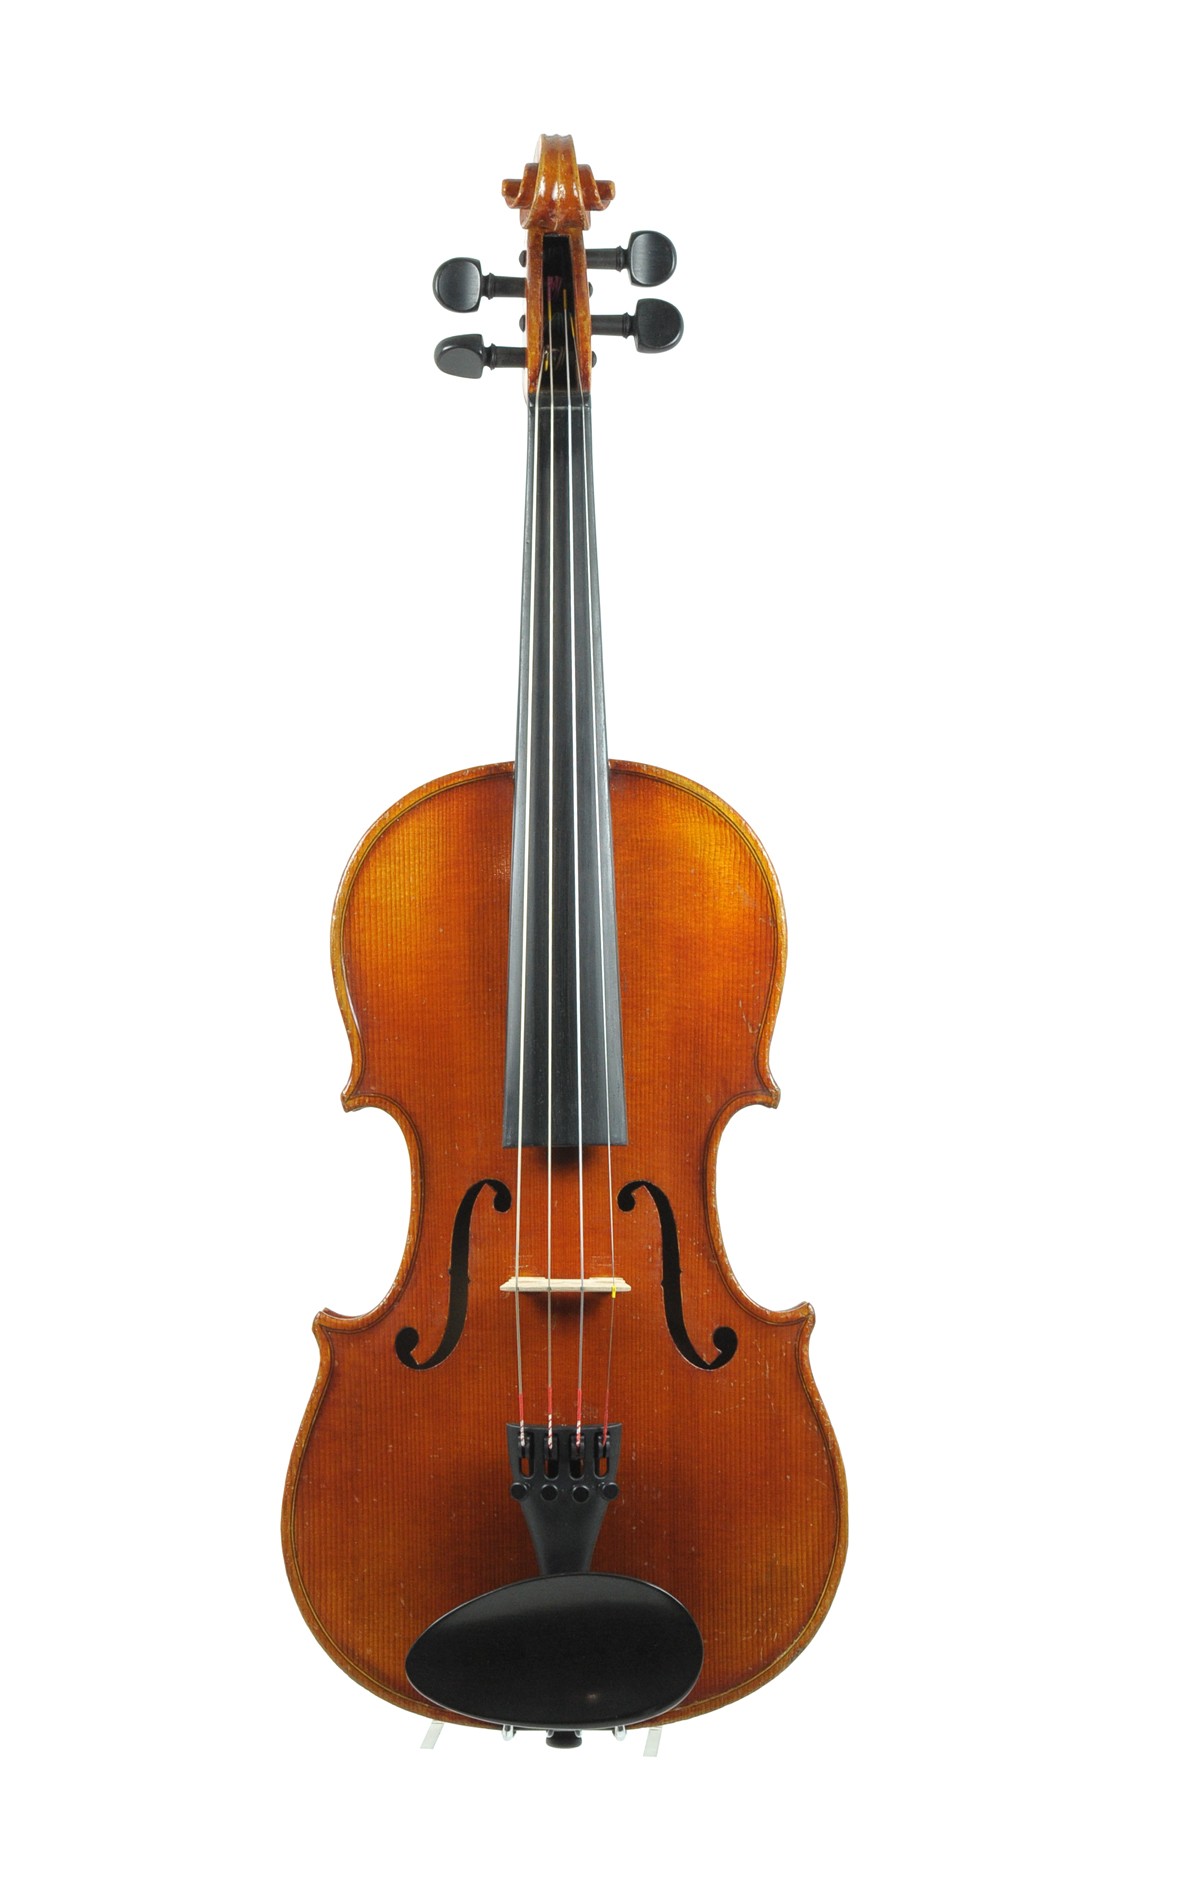 3/4 violin from Germany/Bohemia, approx. 1940 - top